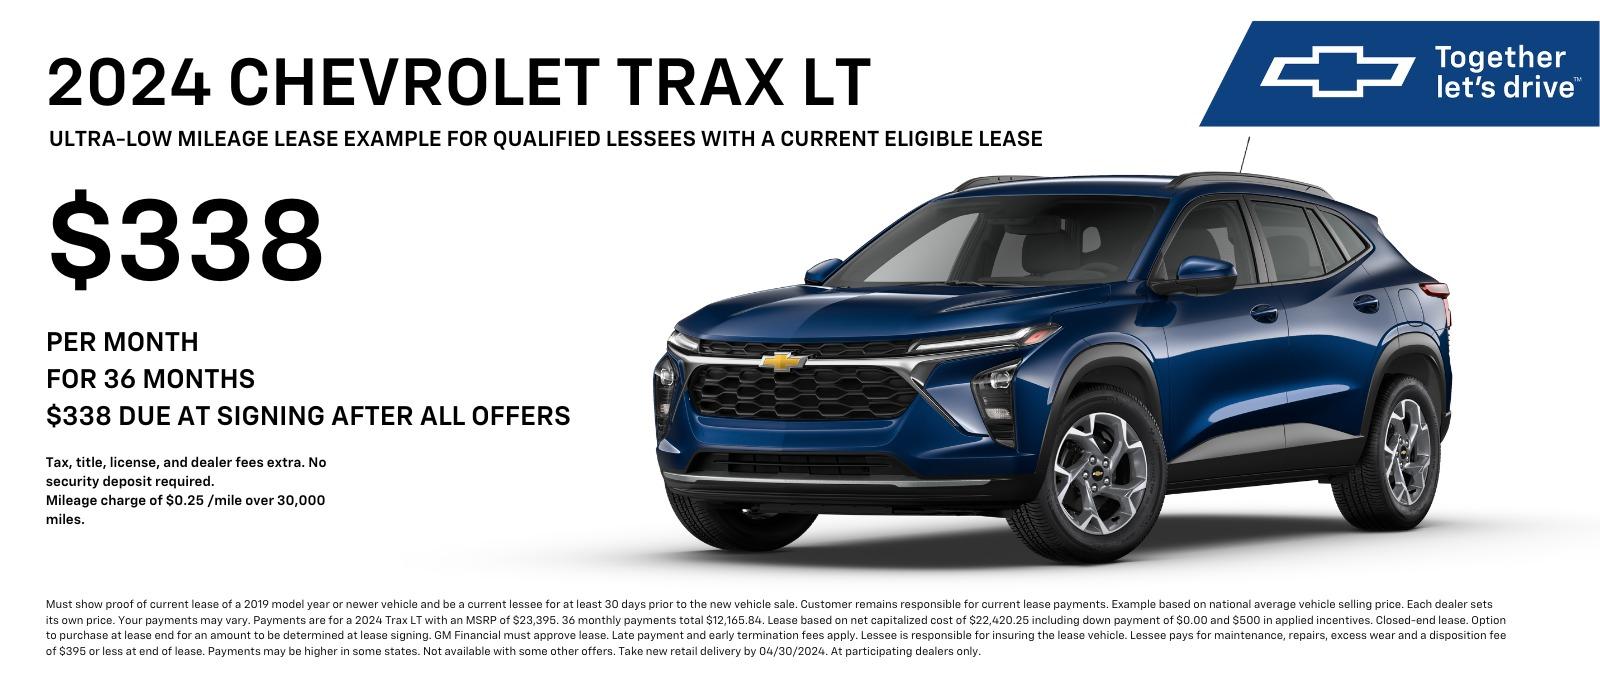 2024 CHEVROLET TRAX LT
 ULTRA-LOW MILEAGE LEASE EXAMPLE FOR QUALIFIED LESSEES WITH A CURRENT ELIGIBLE LEASE
 $338 PER MONTH FOR 36 MONTHS 
$338 DUE AT SIGNING AFTER ALL OFFERS 
Tax, title, license, and dealer fees extra. No security deposit required. Mileage charge of $0.25/mile over 30,000 miles.